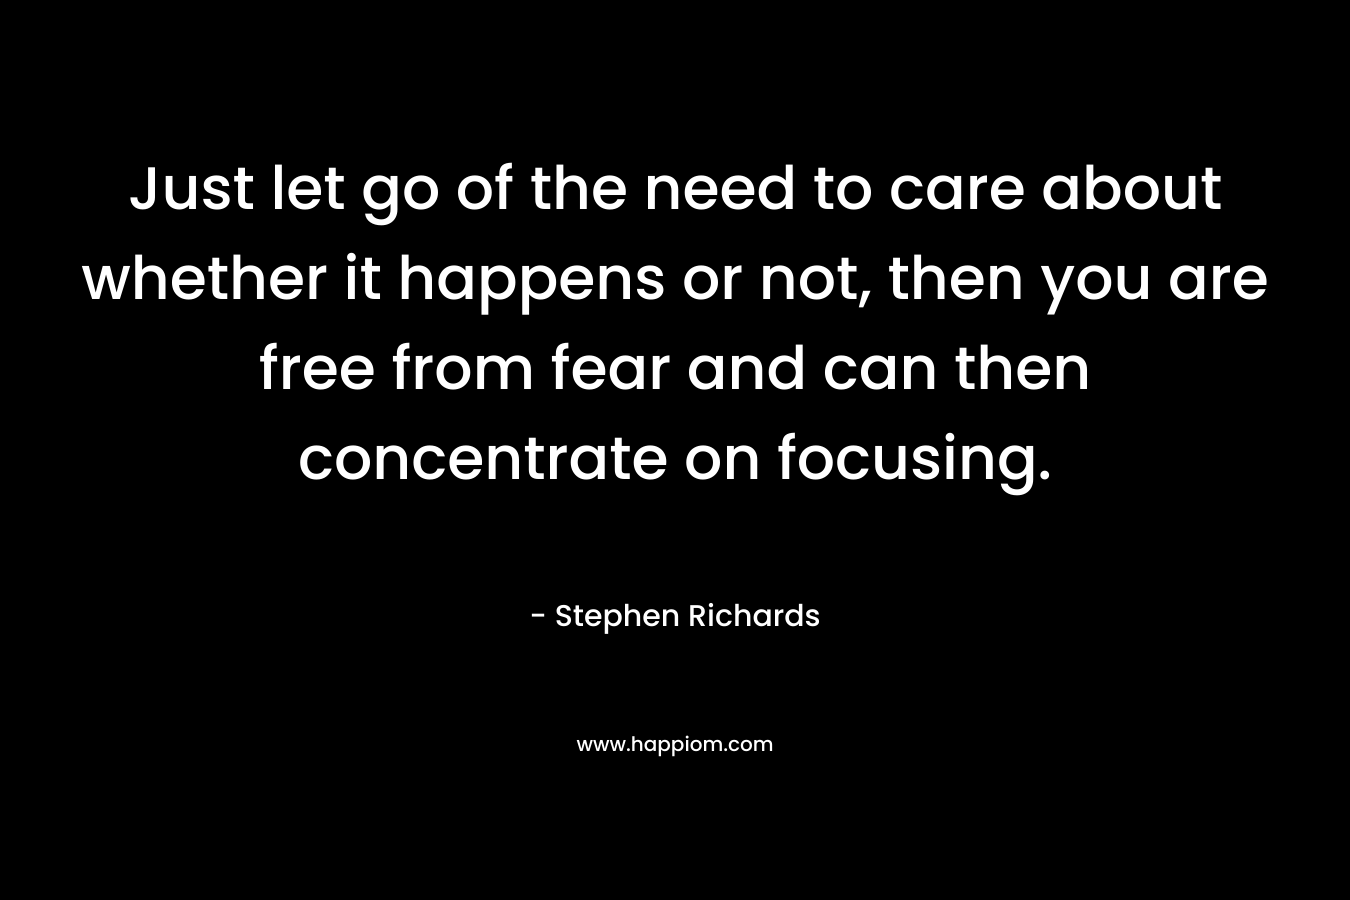 Just let go of the need to care about whether it happens or not, then you are free from fear and can then concentrate on focusing.